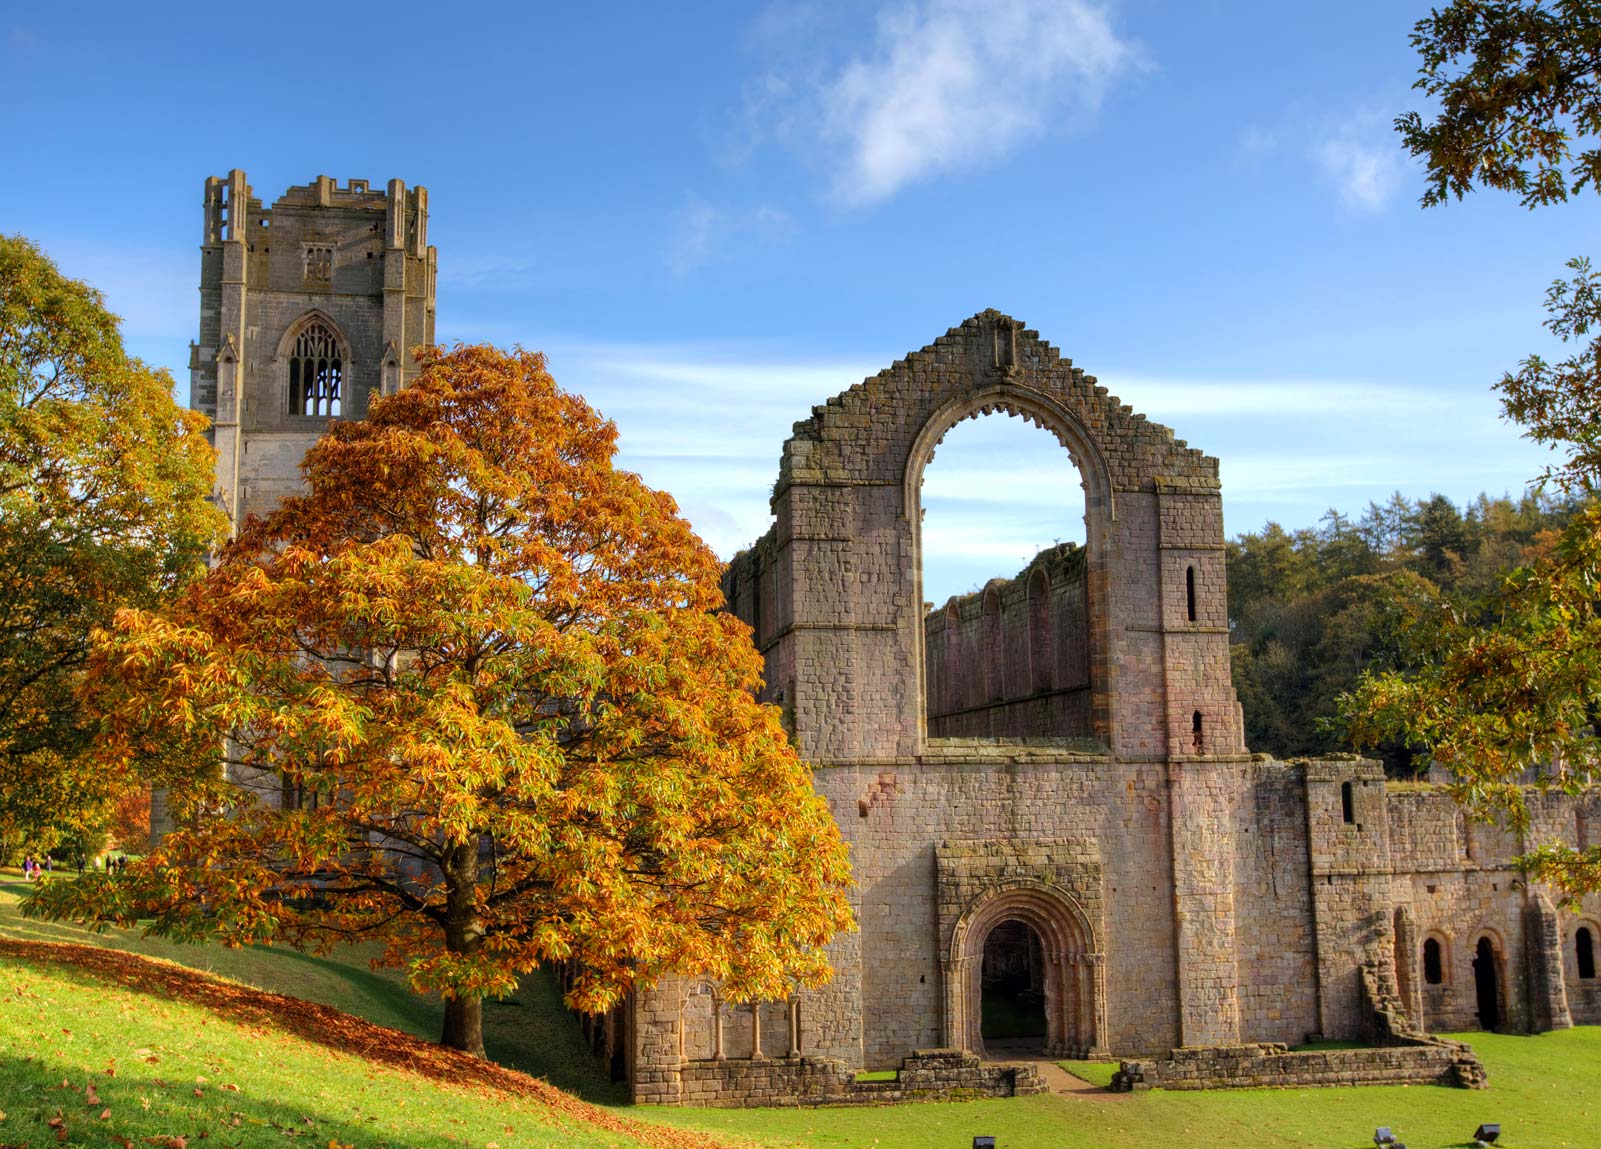 Fountains Abbey Backgrounds, Compatible - PC, Mobile, Gadgets| 1601x1149 px